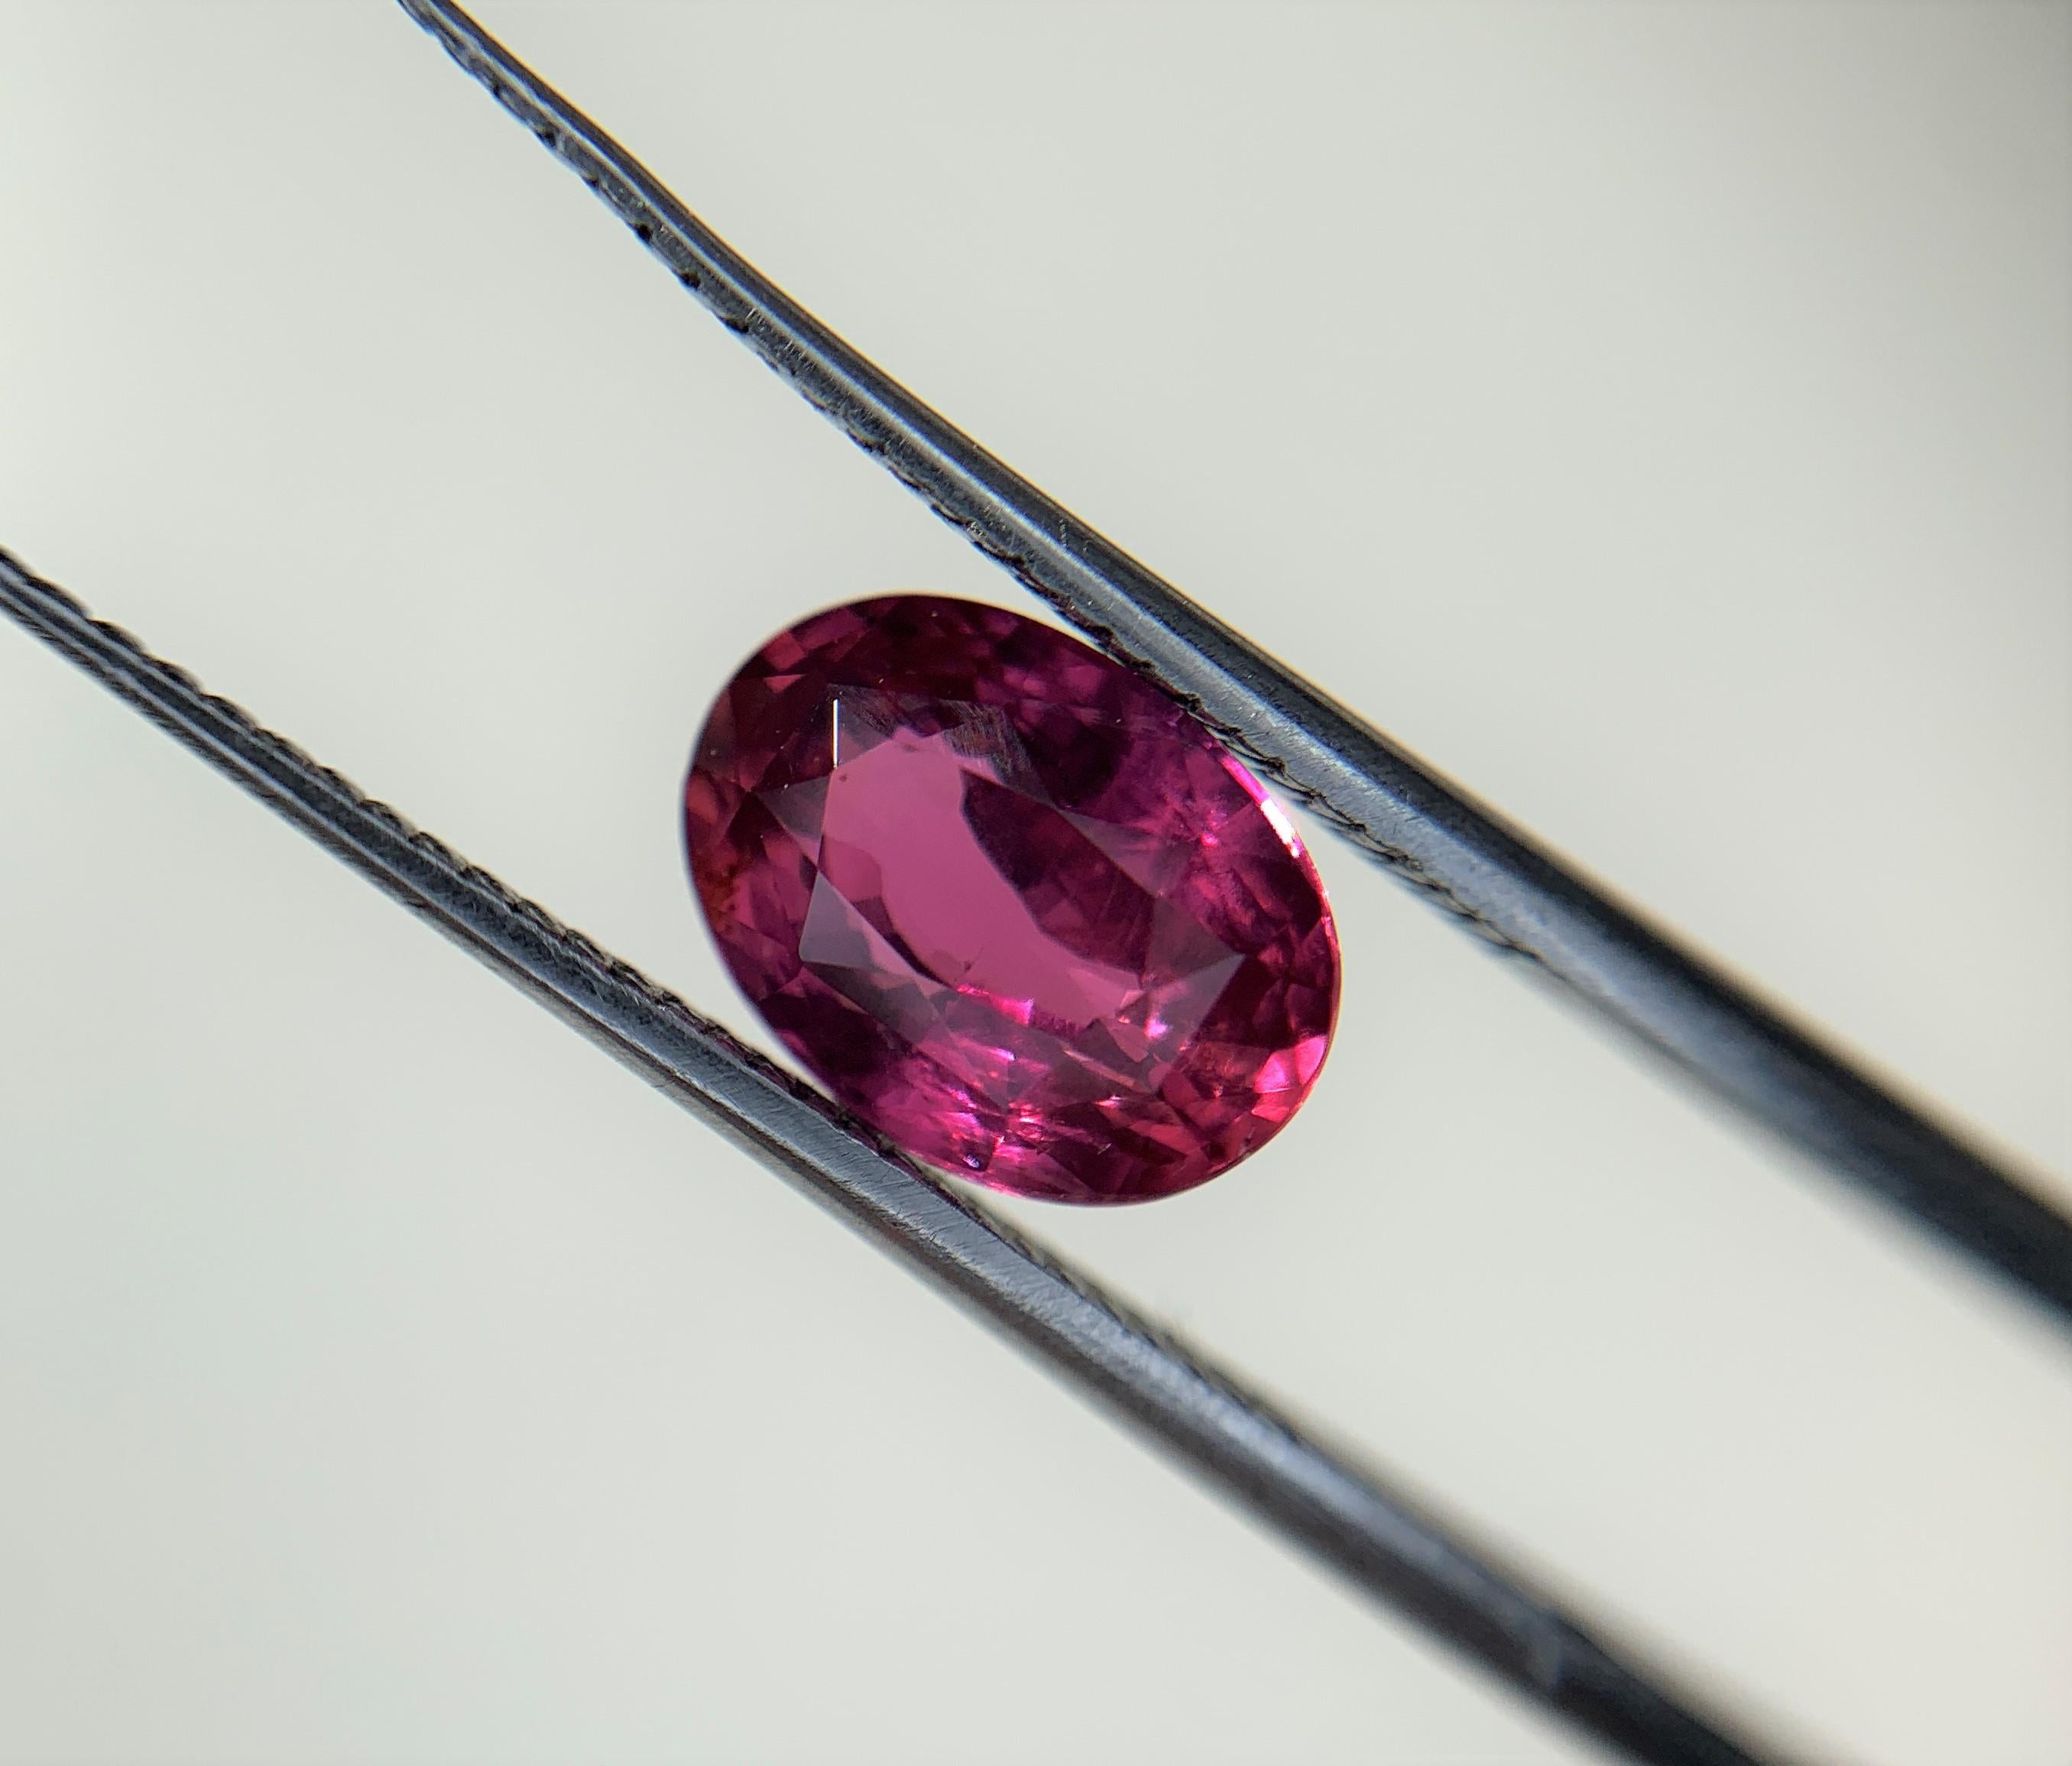 This custom, bezel-set pendant necklace features a gorgeous Emteem Certified 2.5 Carat Oval Cut Red Ruby measuring 8.98 x 6.51 x 4.83 mm and can be made in 18K Rose Gold, 18K Yellow Gold or 18K White Gold.
The beautiful red ruby is one of the most